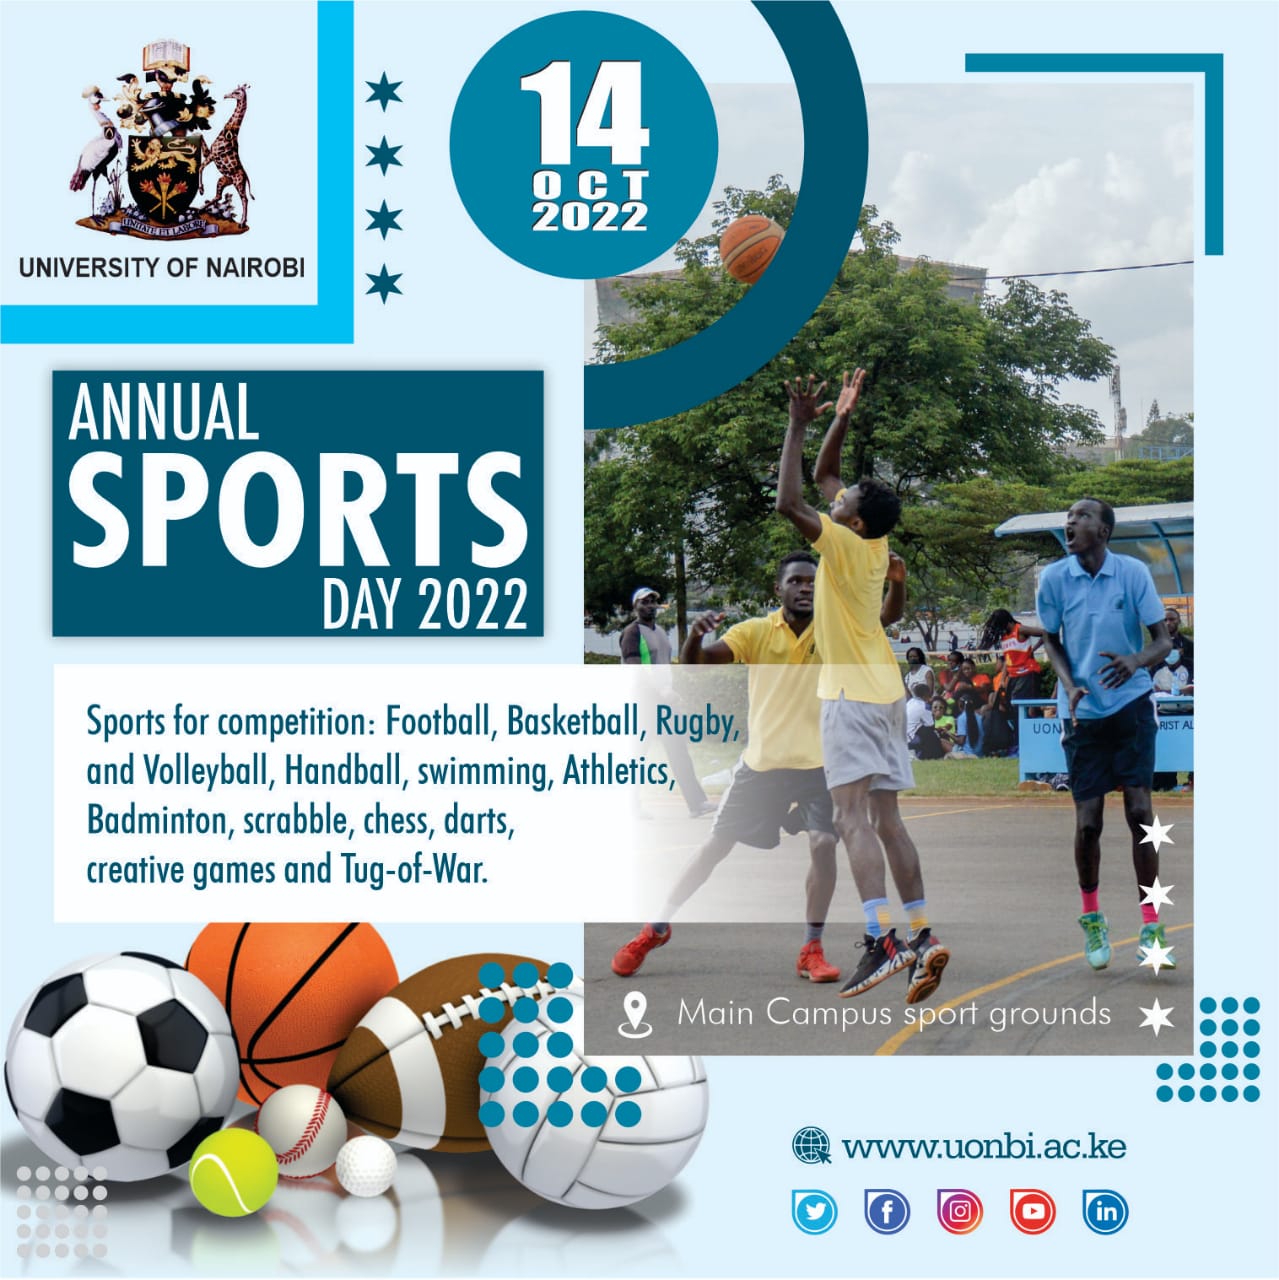 ANNUAL SPORTS DAY,2022